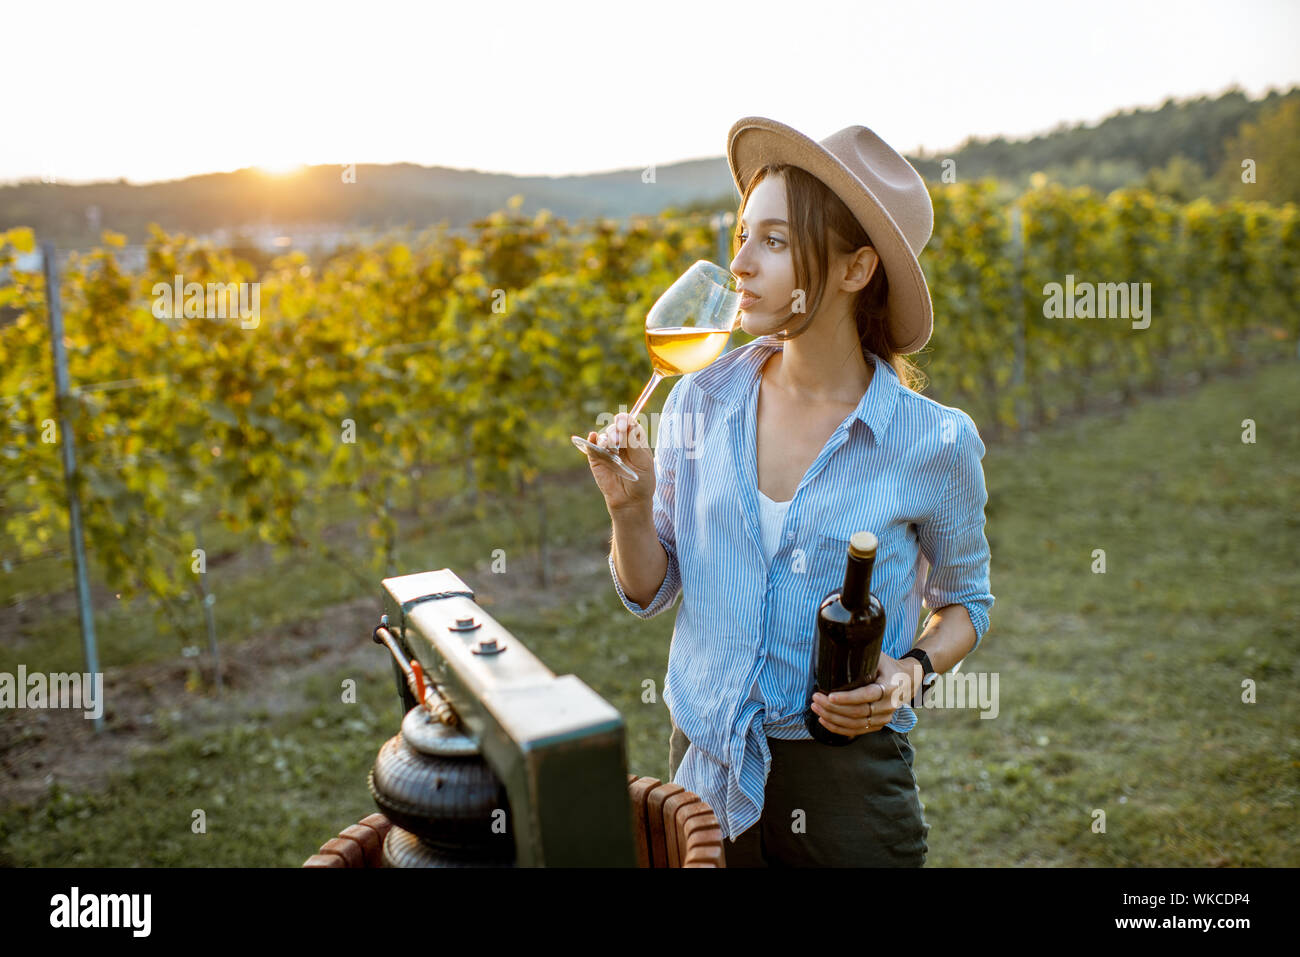 Young and cheerful woman tasting wine, while standing near the press machine on the vineyard on a sunny evening Stock Photo